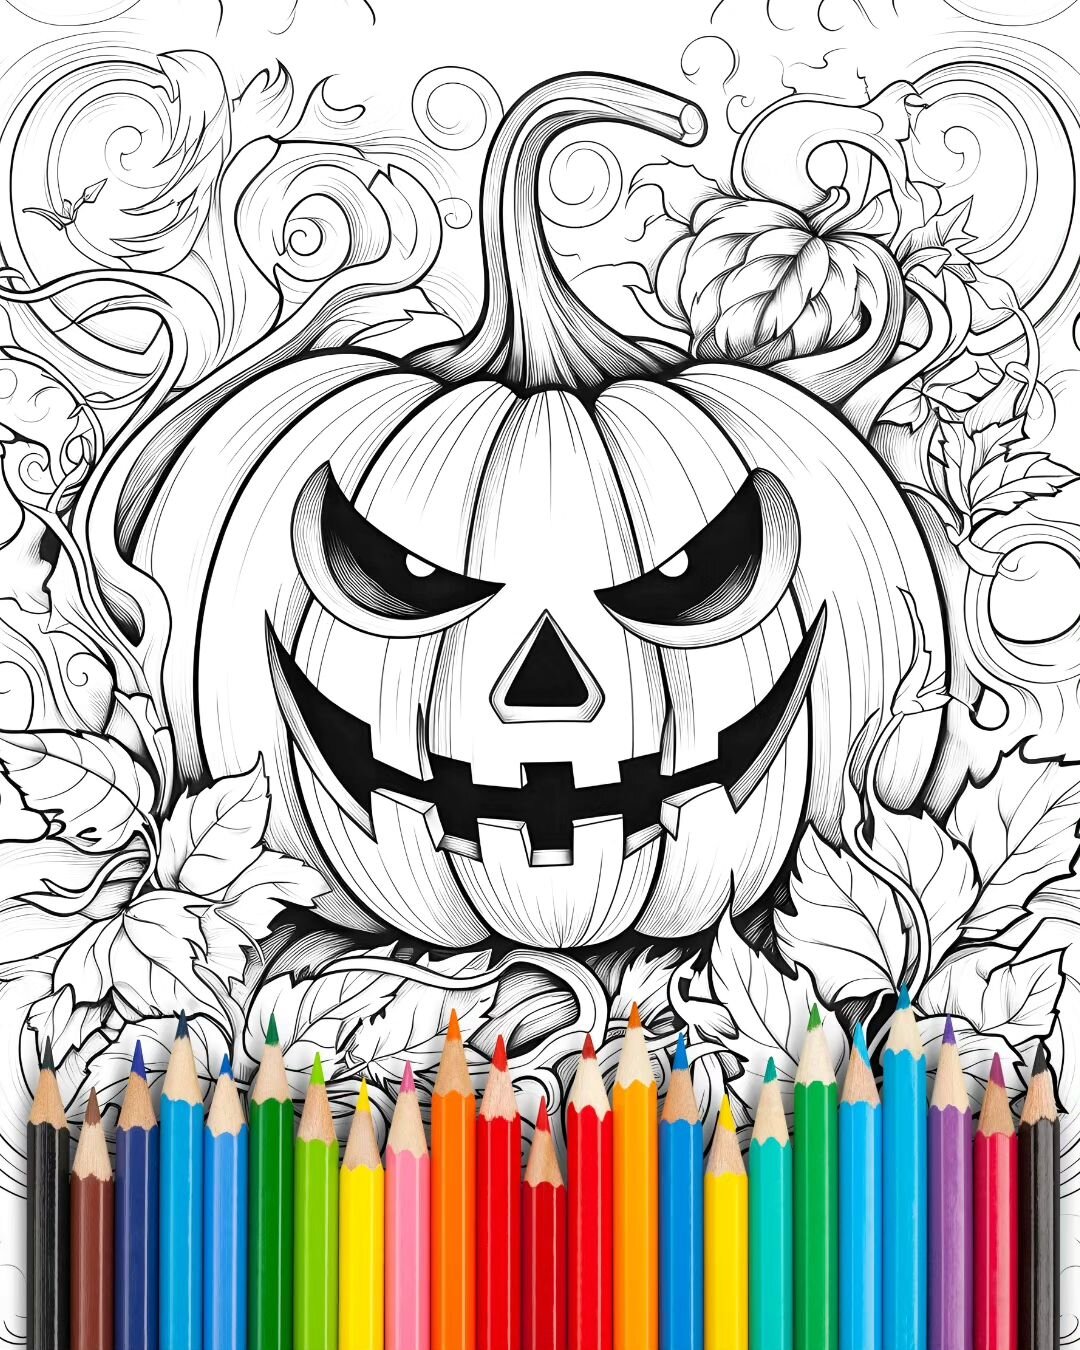 🎃 Sneak peek from our Halloween Coloring Book! Ready to bring this spooky pumpkin to life with your choices of colors and hues? Whether you're thinking of classic oranges or wild rainbow vibes, we've got the canvas-you bring the magic 🌈✨️ Which col